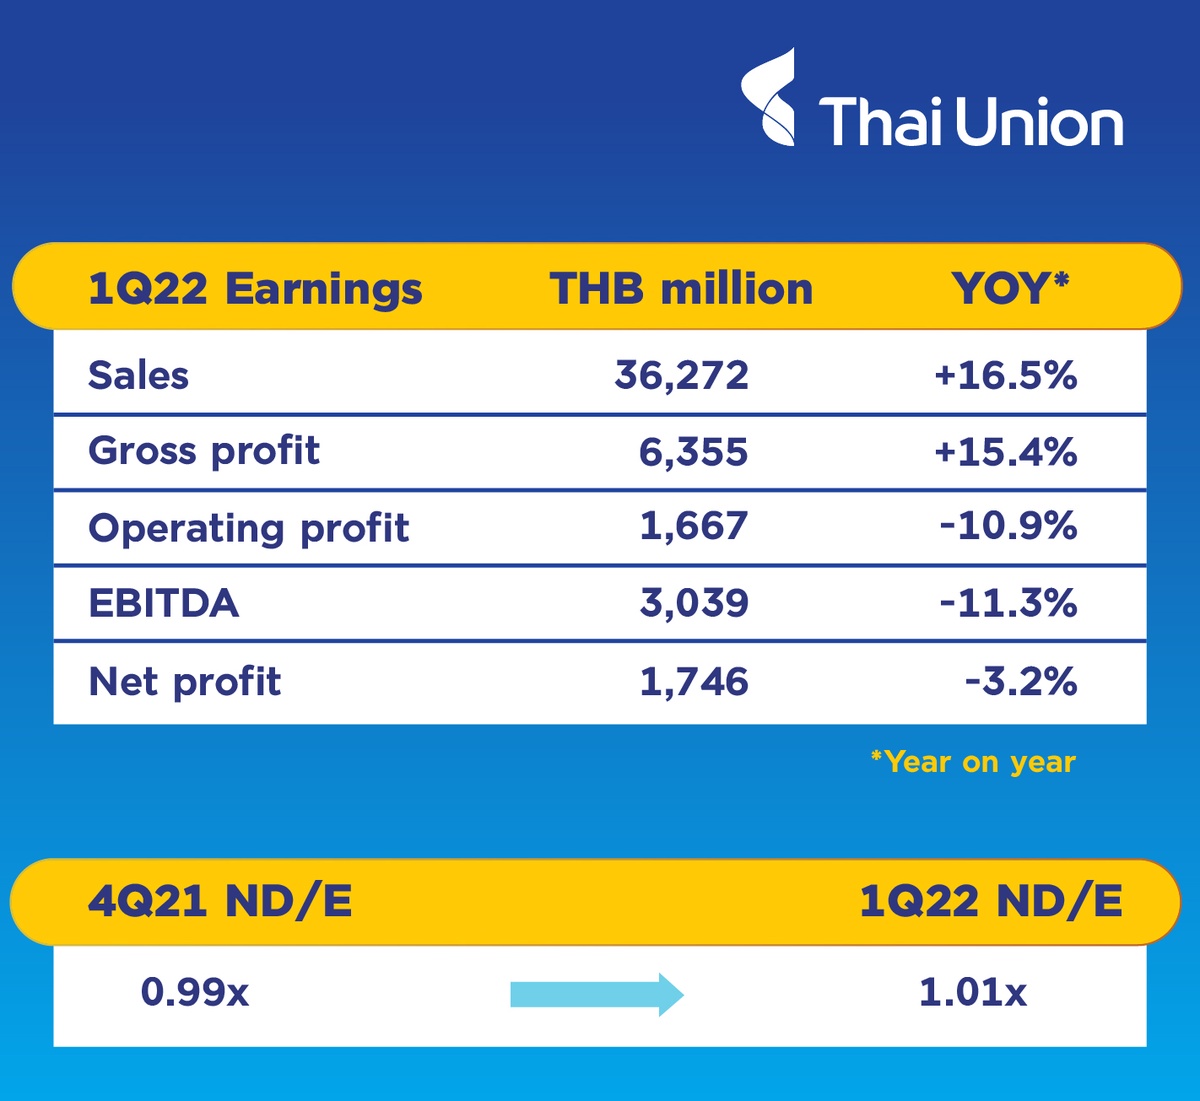 Thai Union reports record 1Q22 revenue on the back of robust global demand and strong core business performance